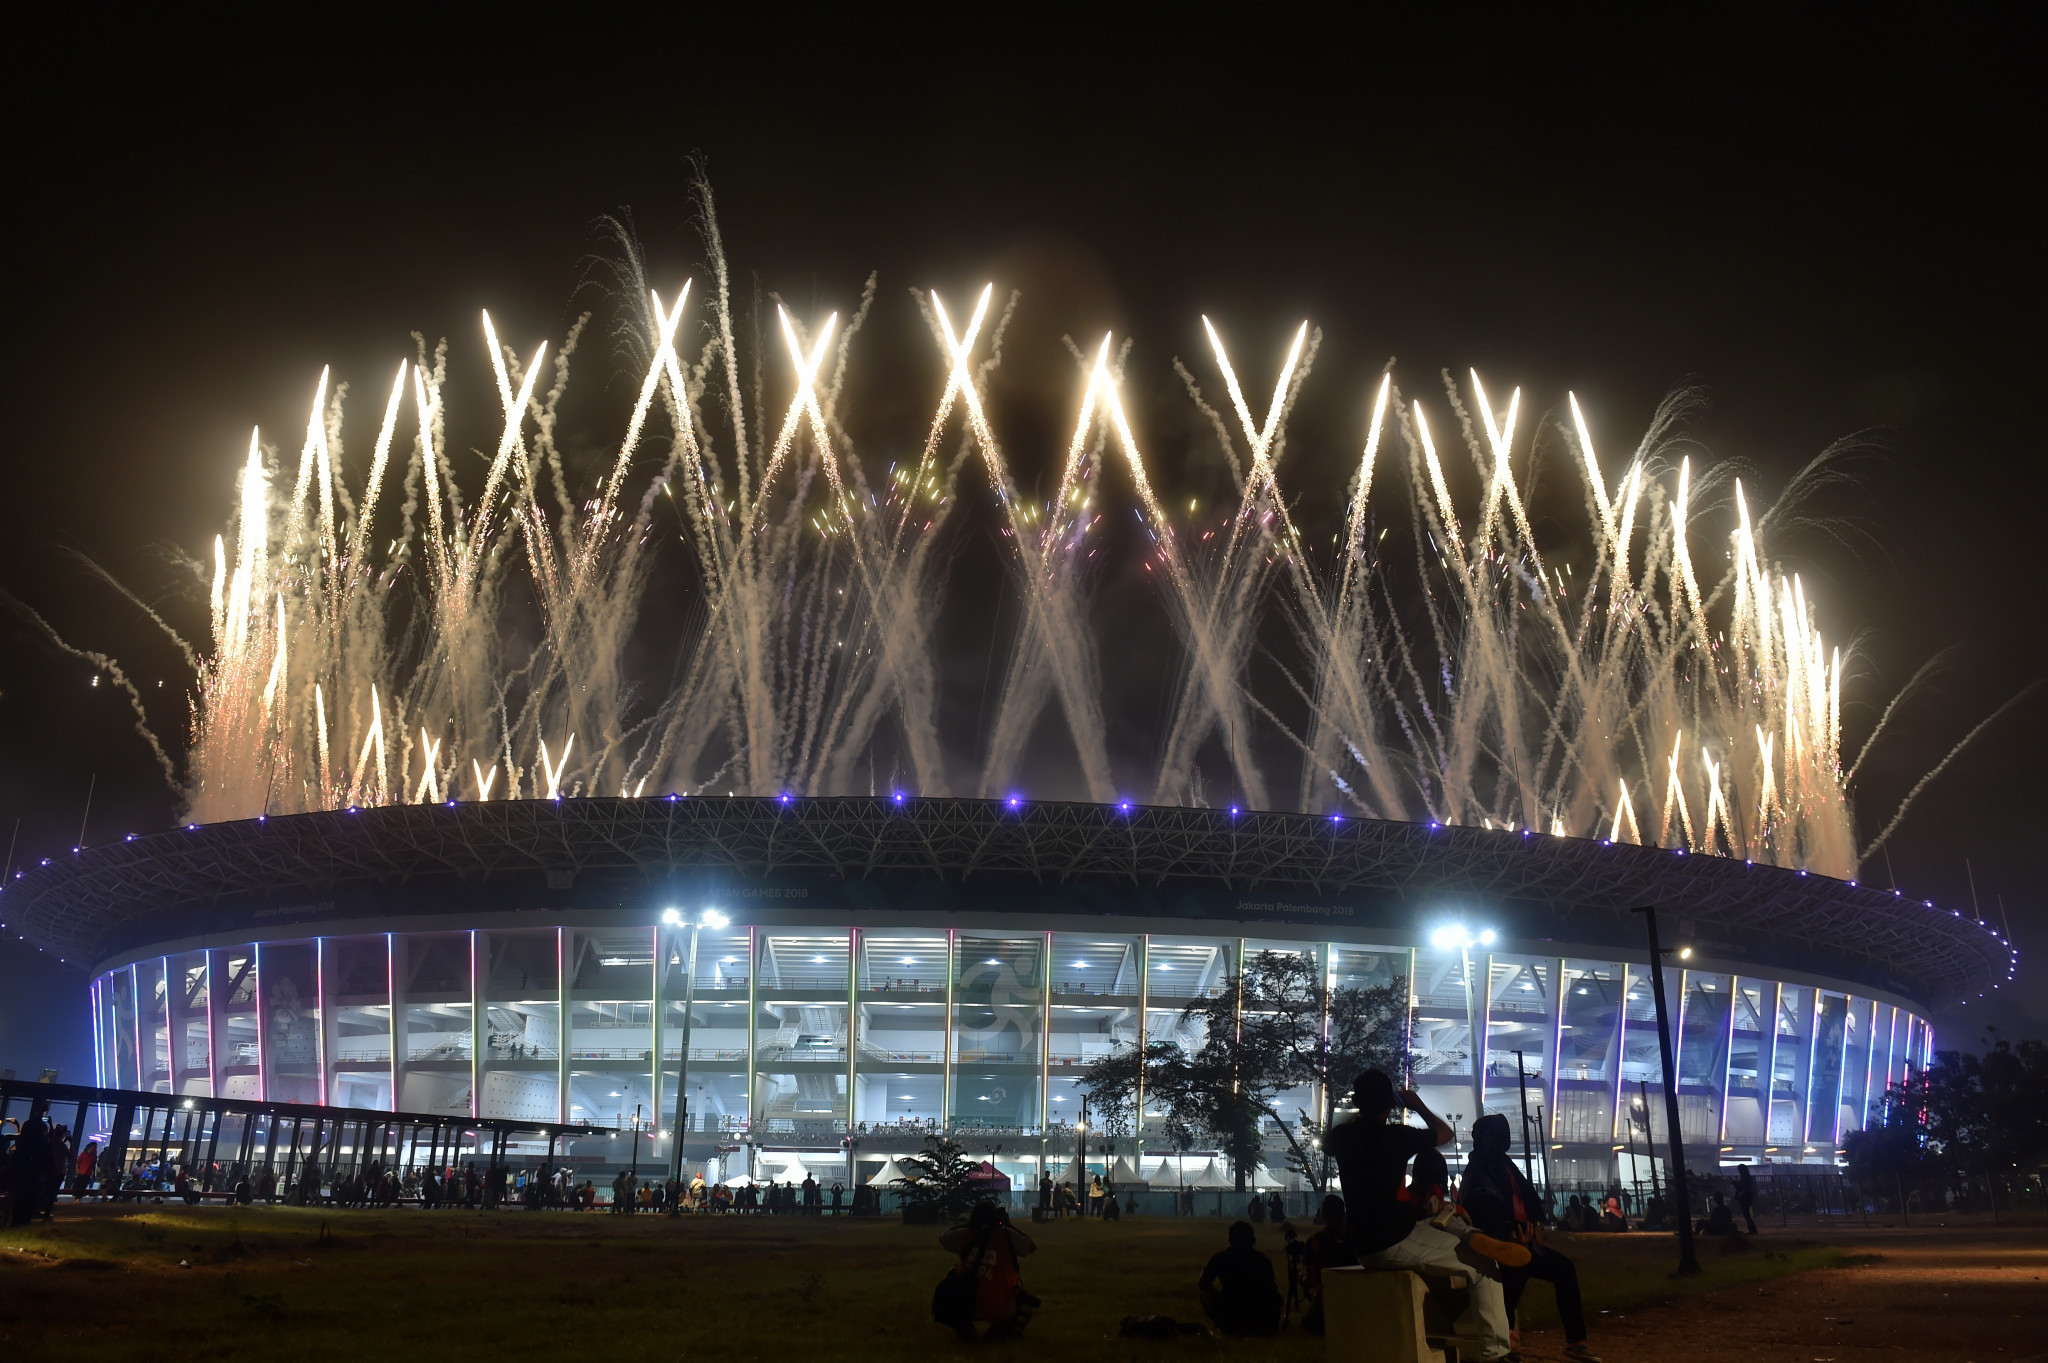 Jakarta and Palembang hosted the 2018 Asian Games and Asian Para Games ©Getty Images